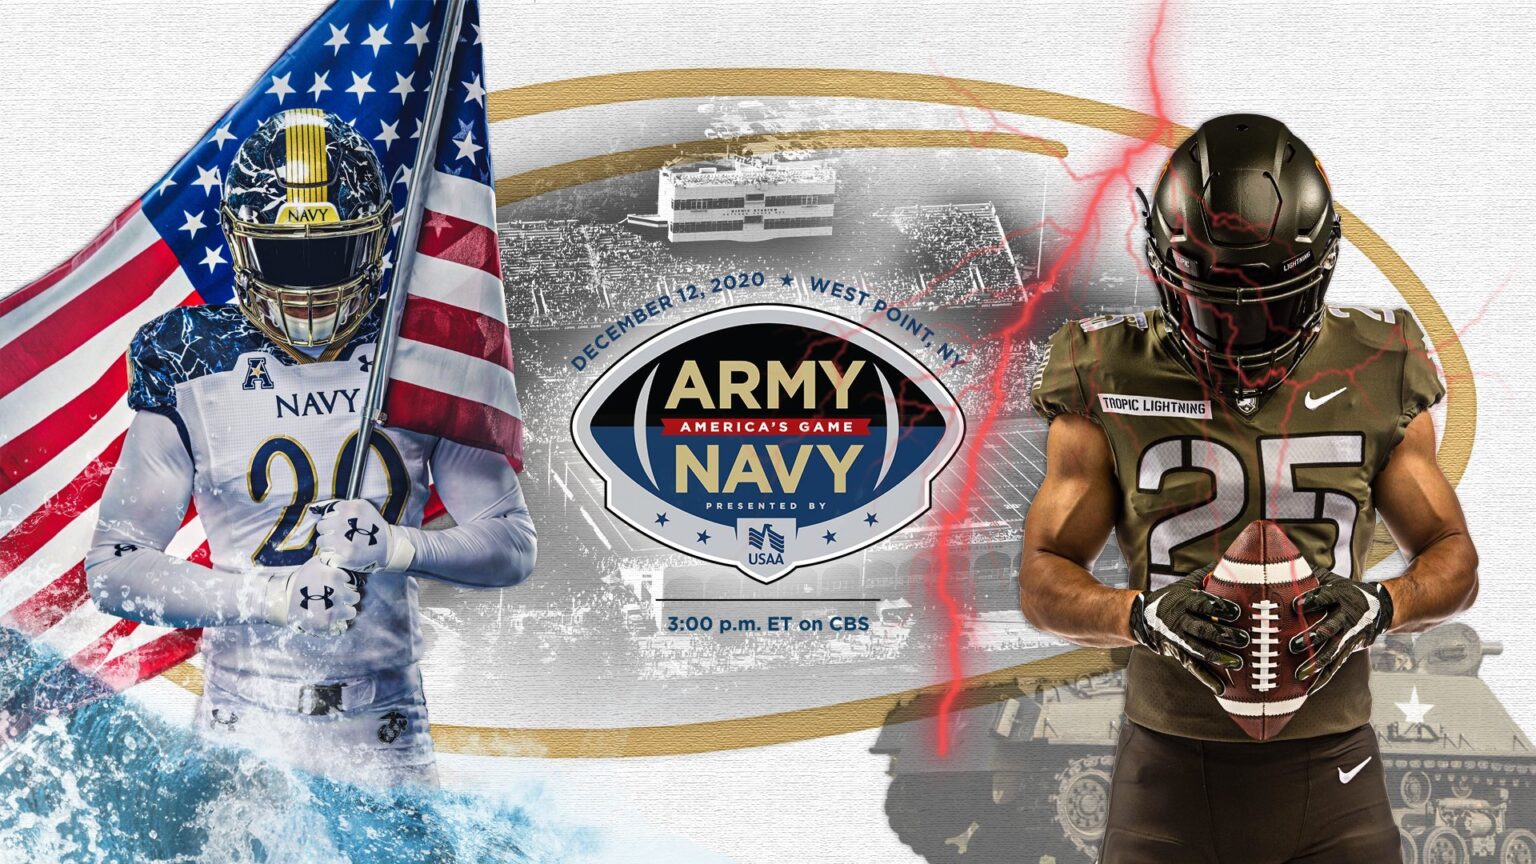 The annual Navy vs. Army game takes place on Saturday, December 12. Take a look at the history and traditions behind the historic rivalry.